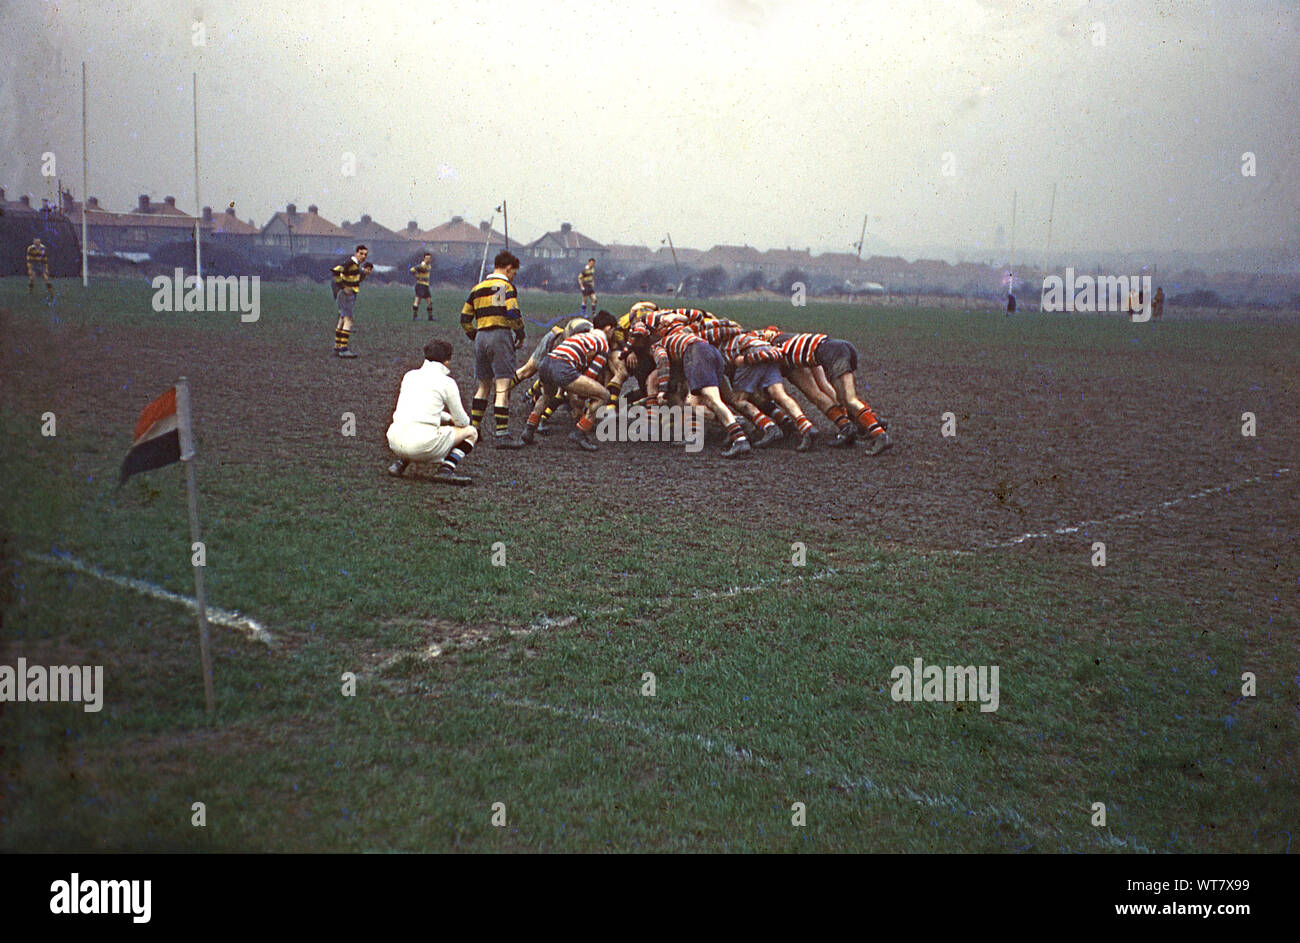 1960s, historical, amateur rugby union match at Wallasey, Wirral, England UK, outside on a muddy pitch, male players crouched down in a scrum watched by the referee. Stock Photo